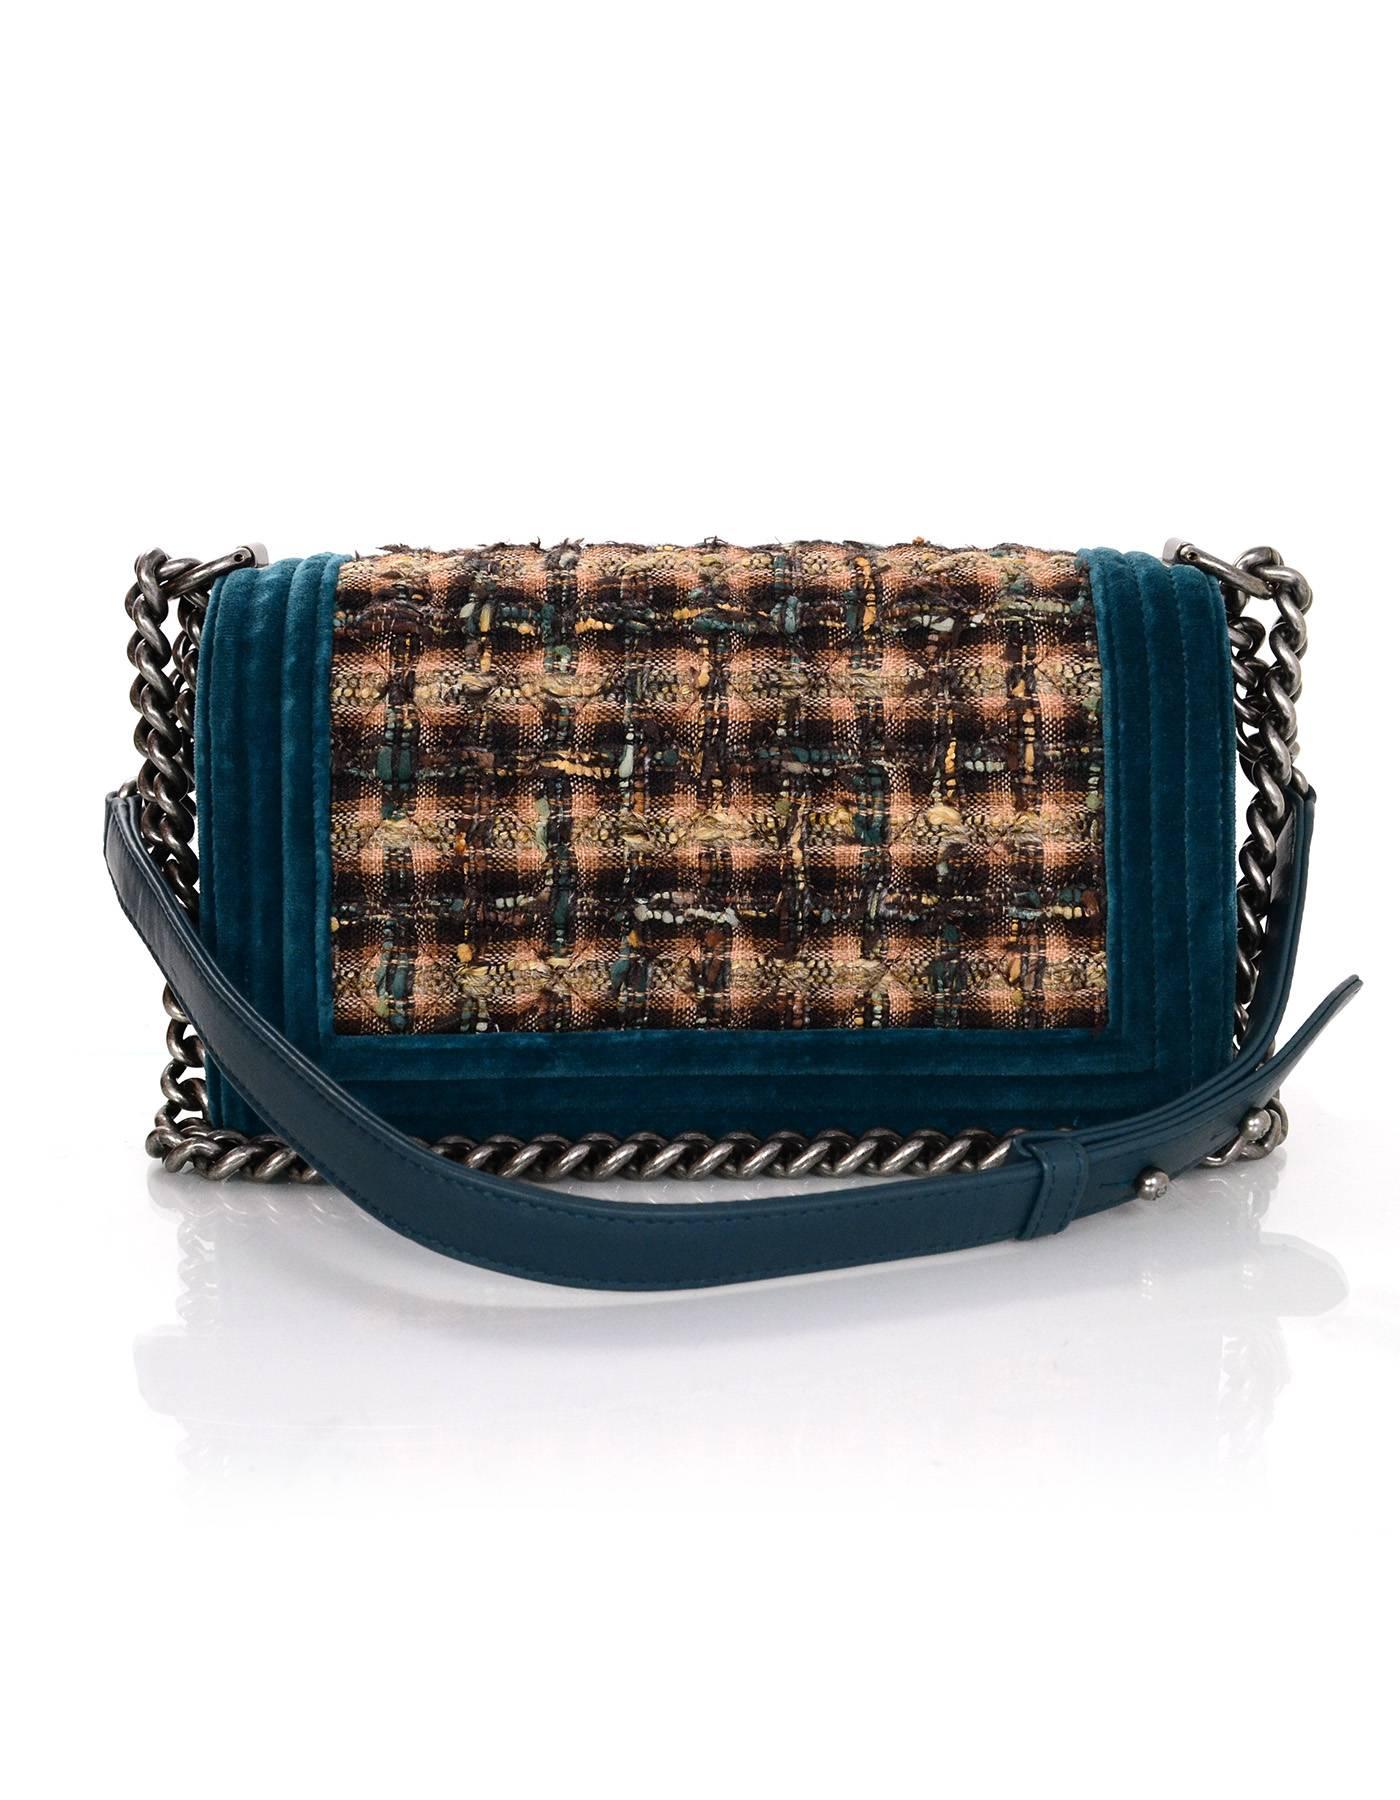 Chanel Paris-Edinburgh Velvet & Tweed Medium Boy Bag 
Features velvet trim and leather detail on shoulder strap

Made In: Italy
Year of Production: 2013
Color: Teal, tan and brown
Hardware: Oxidized sivertone
Materials: Tweed, velvet and